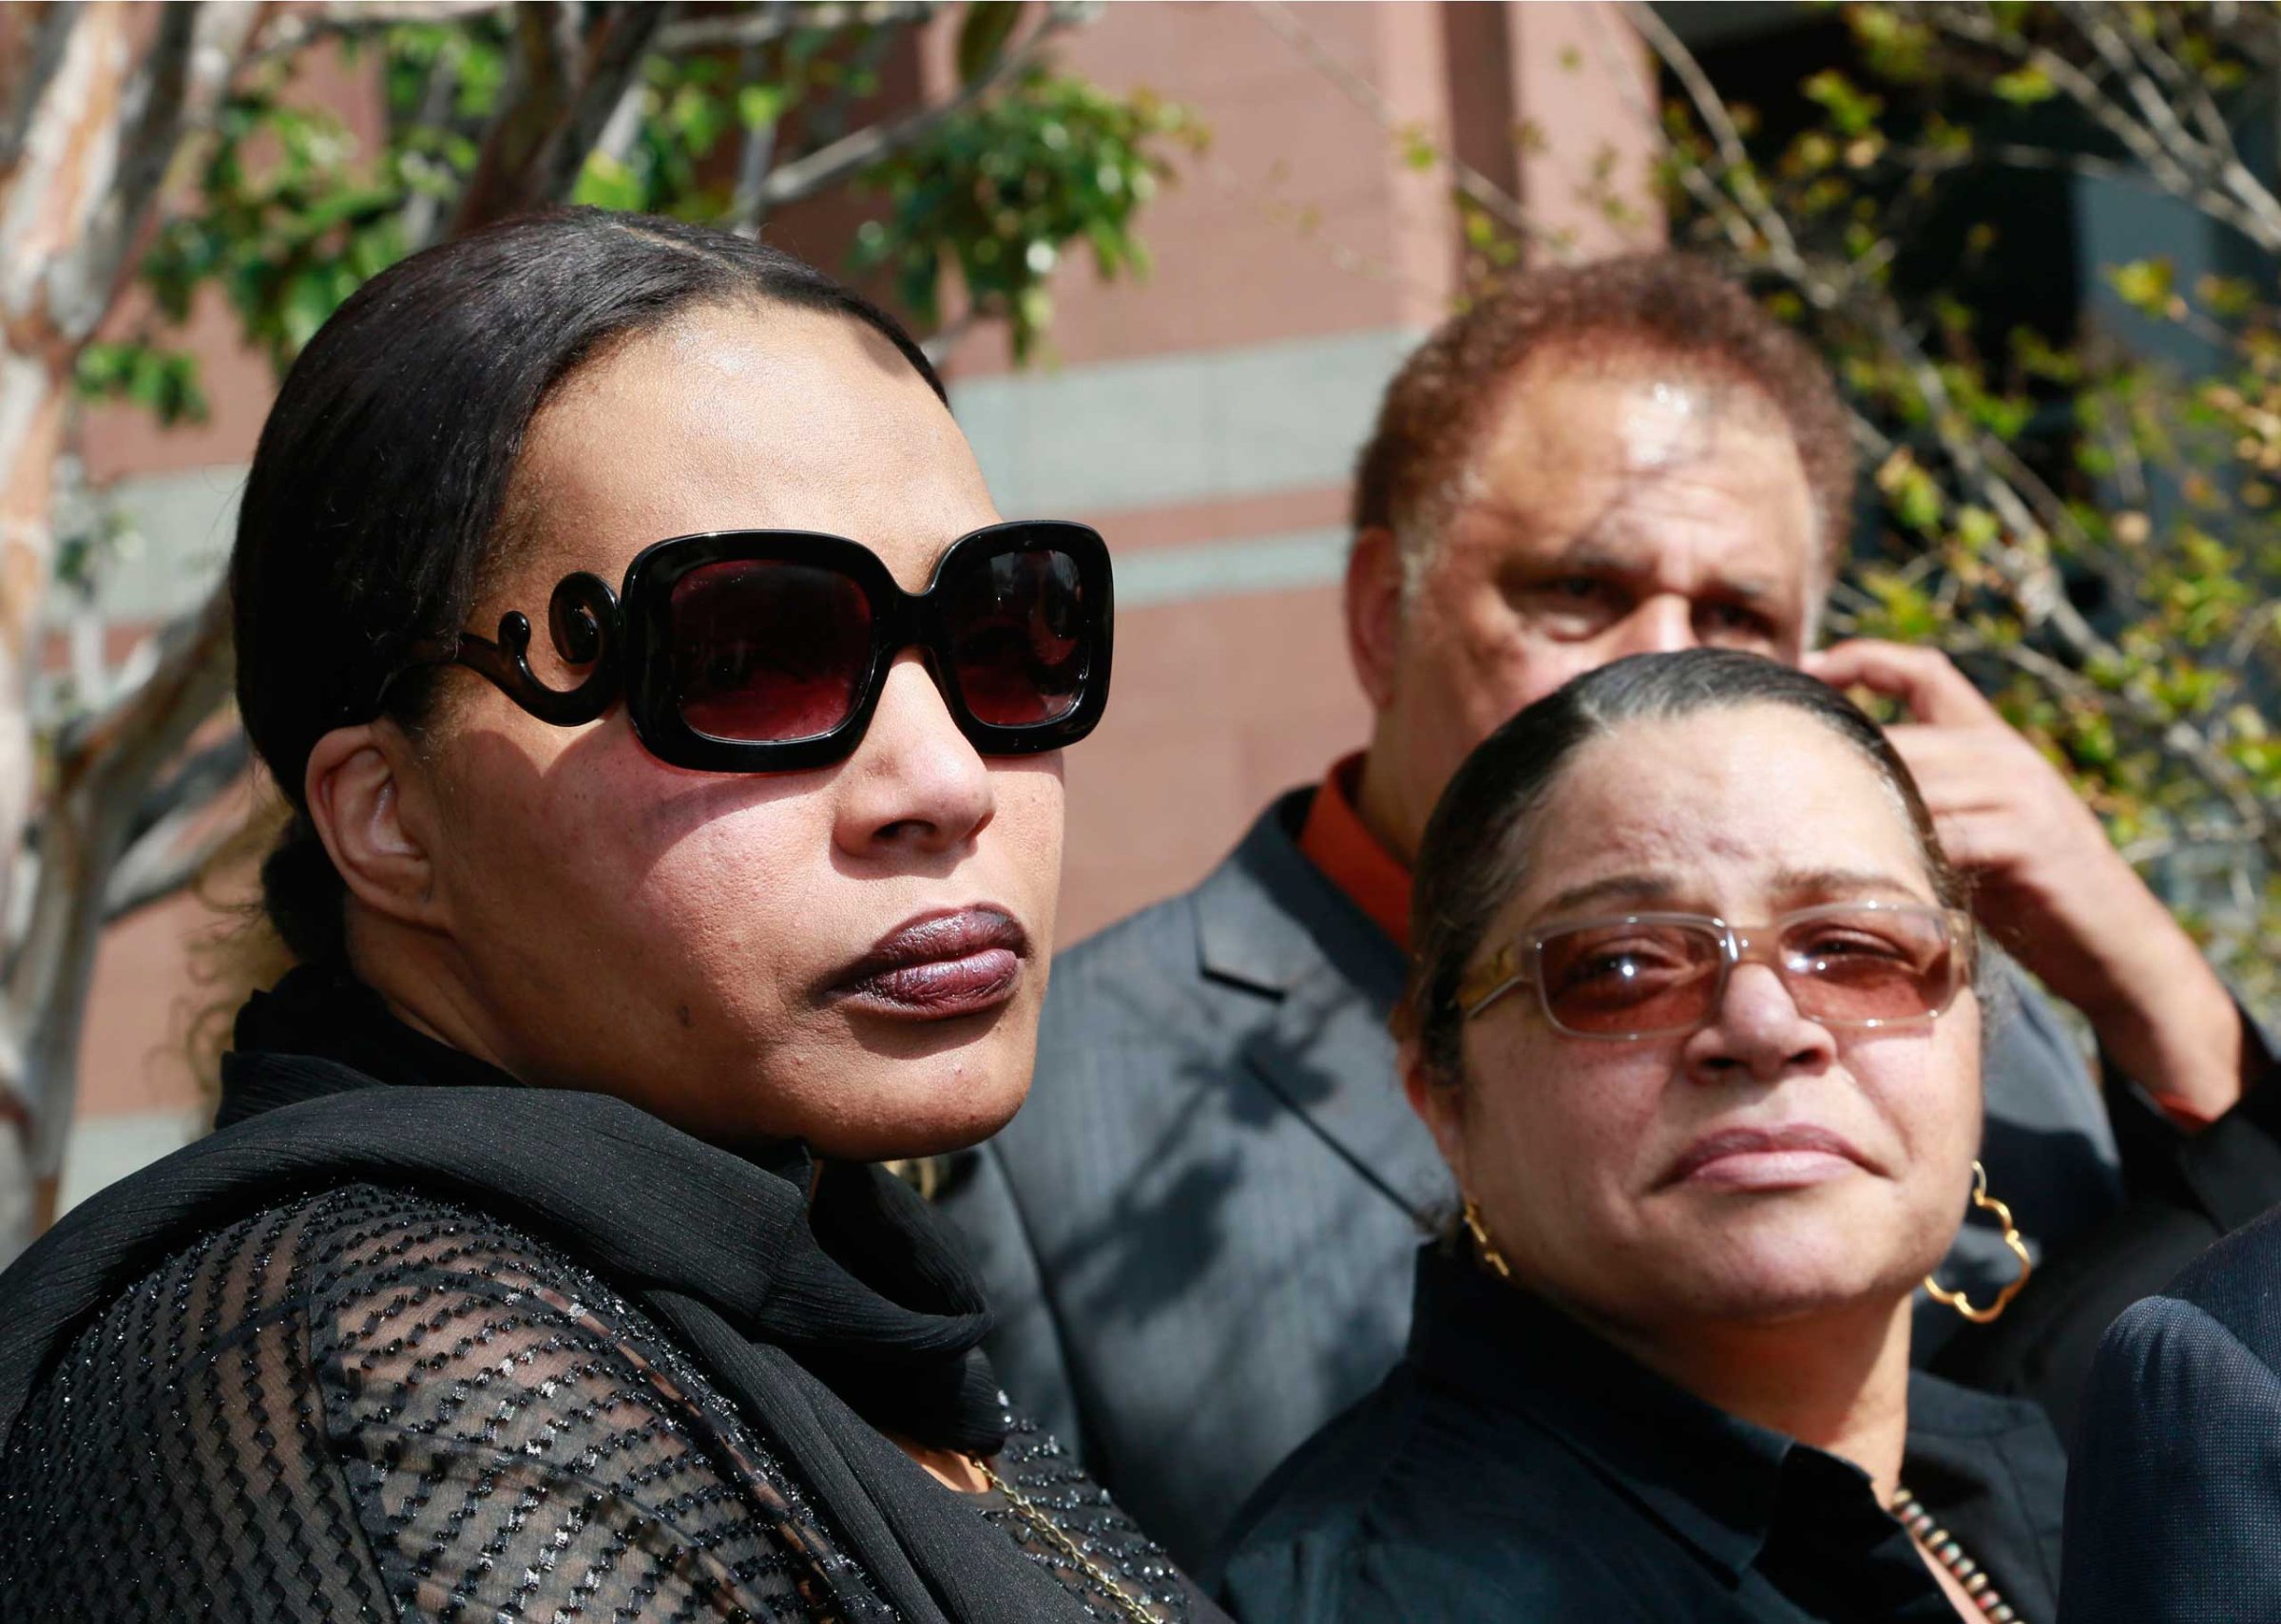 Marvin Gaye's daughter, Nona Gaye, left, and his ex-wife, Jan Gaye, take questions from the media outside Los Angeles U.S. District Court, after a jury awarded the singer's children nearly $7.4 million after determining singers Robin Thicke and Pharrell Williams copied their father's music to create "Blurred Lines," March 10, 2015.